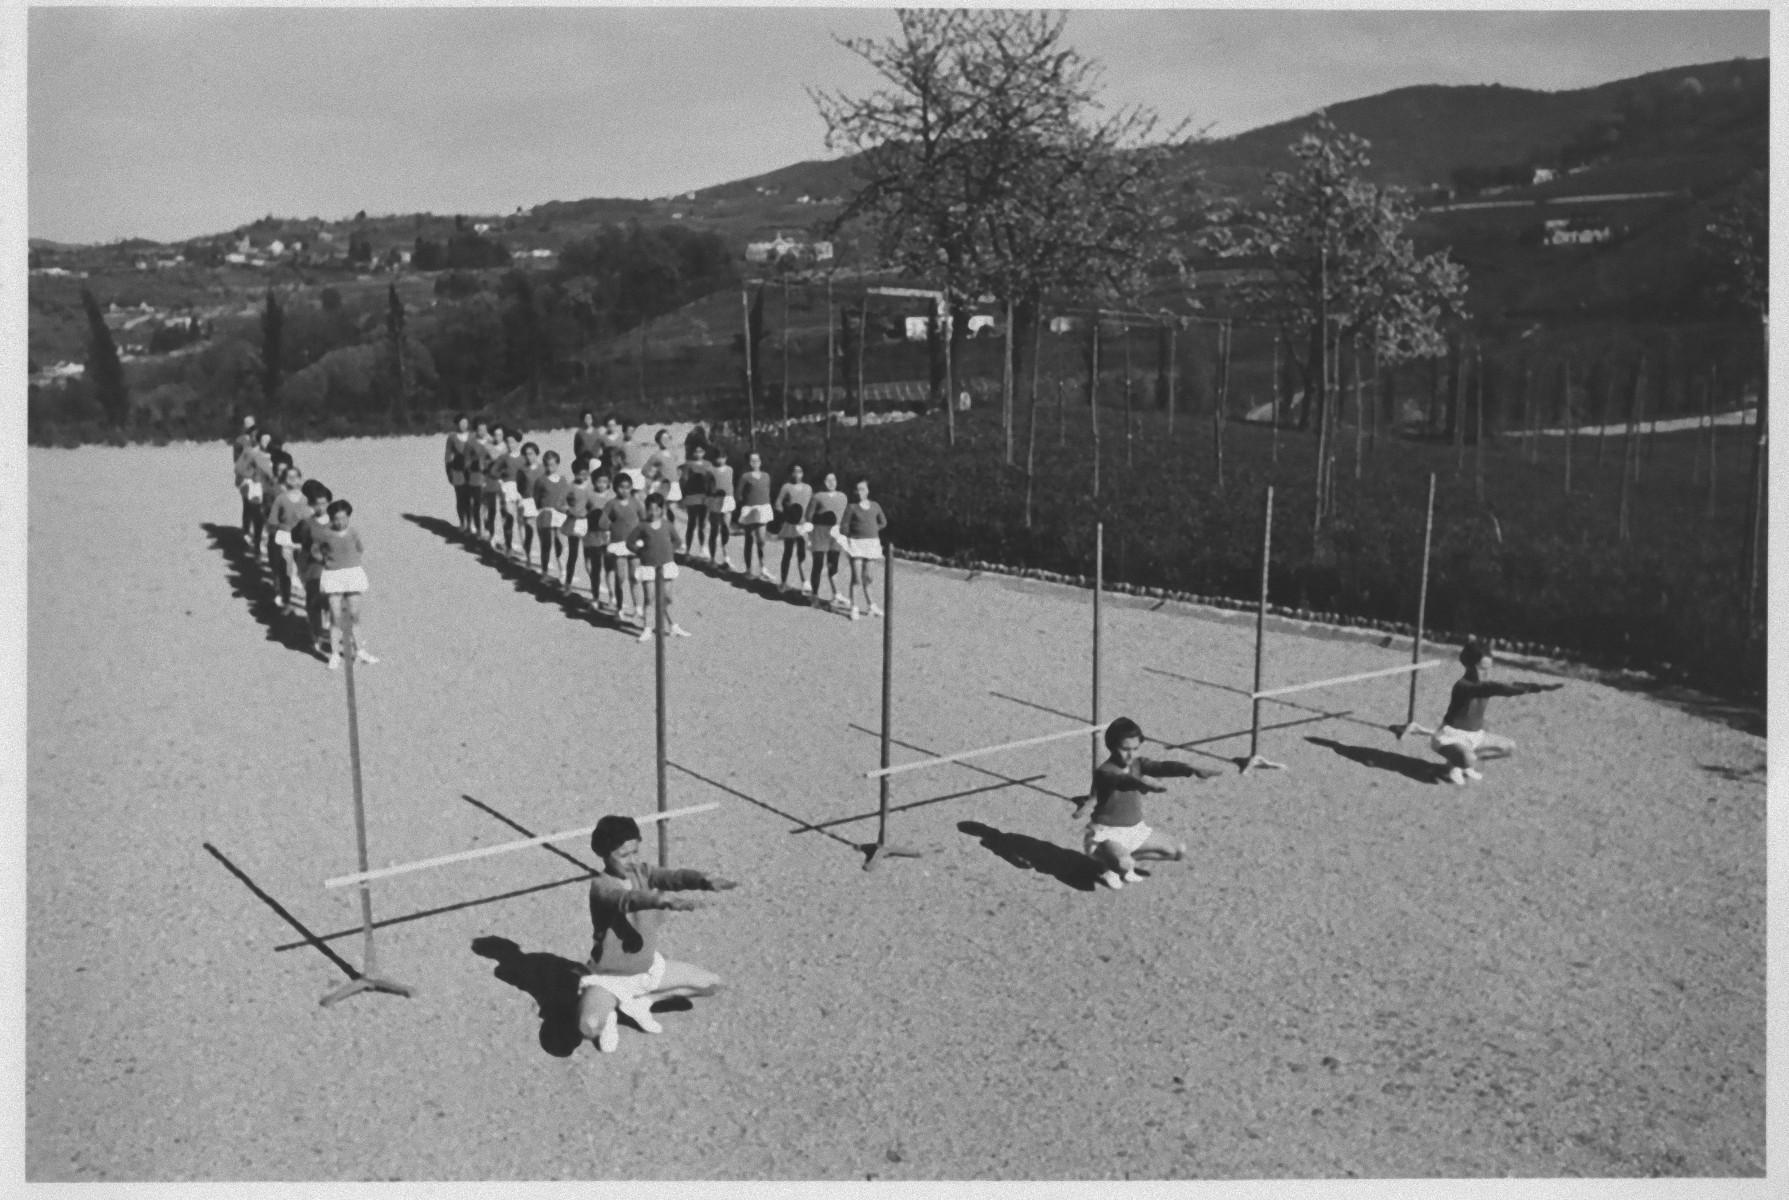 Outdoor Physical Education during Fascism in Italy - b/w Photo - 1930 c.a.